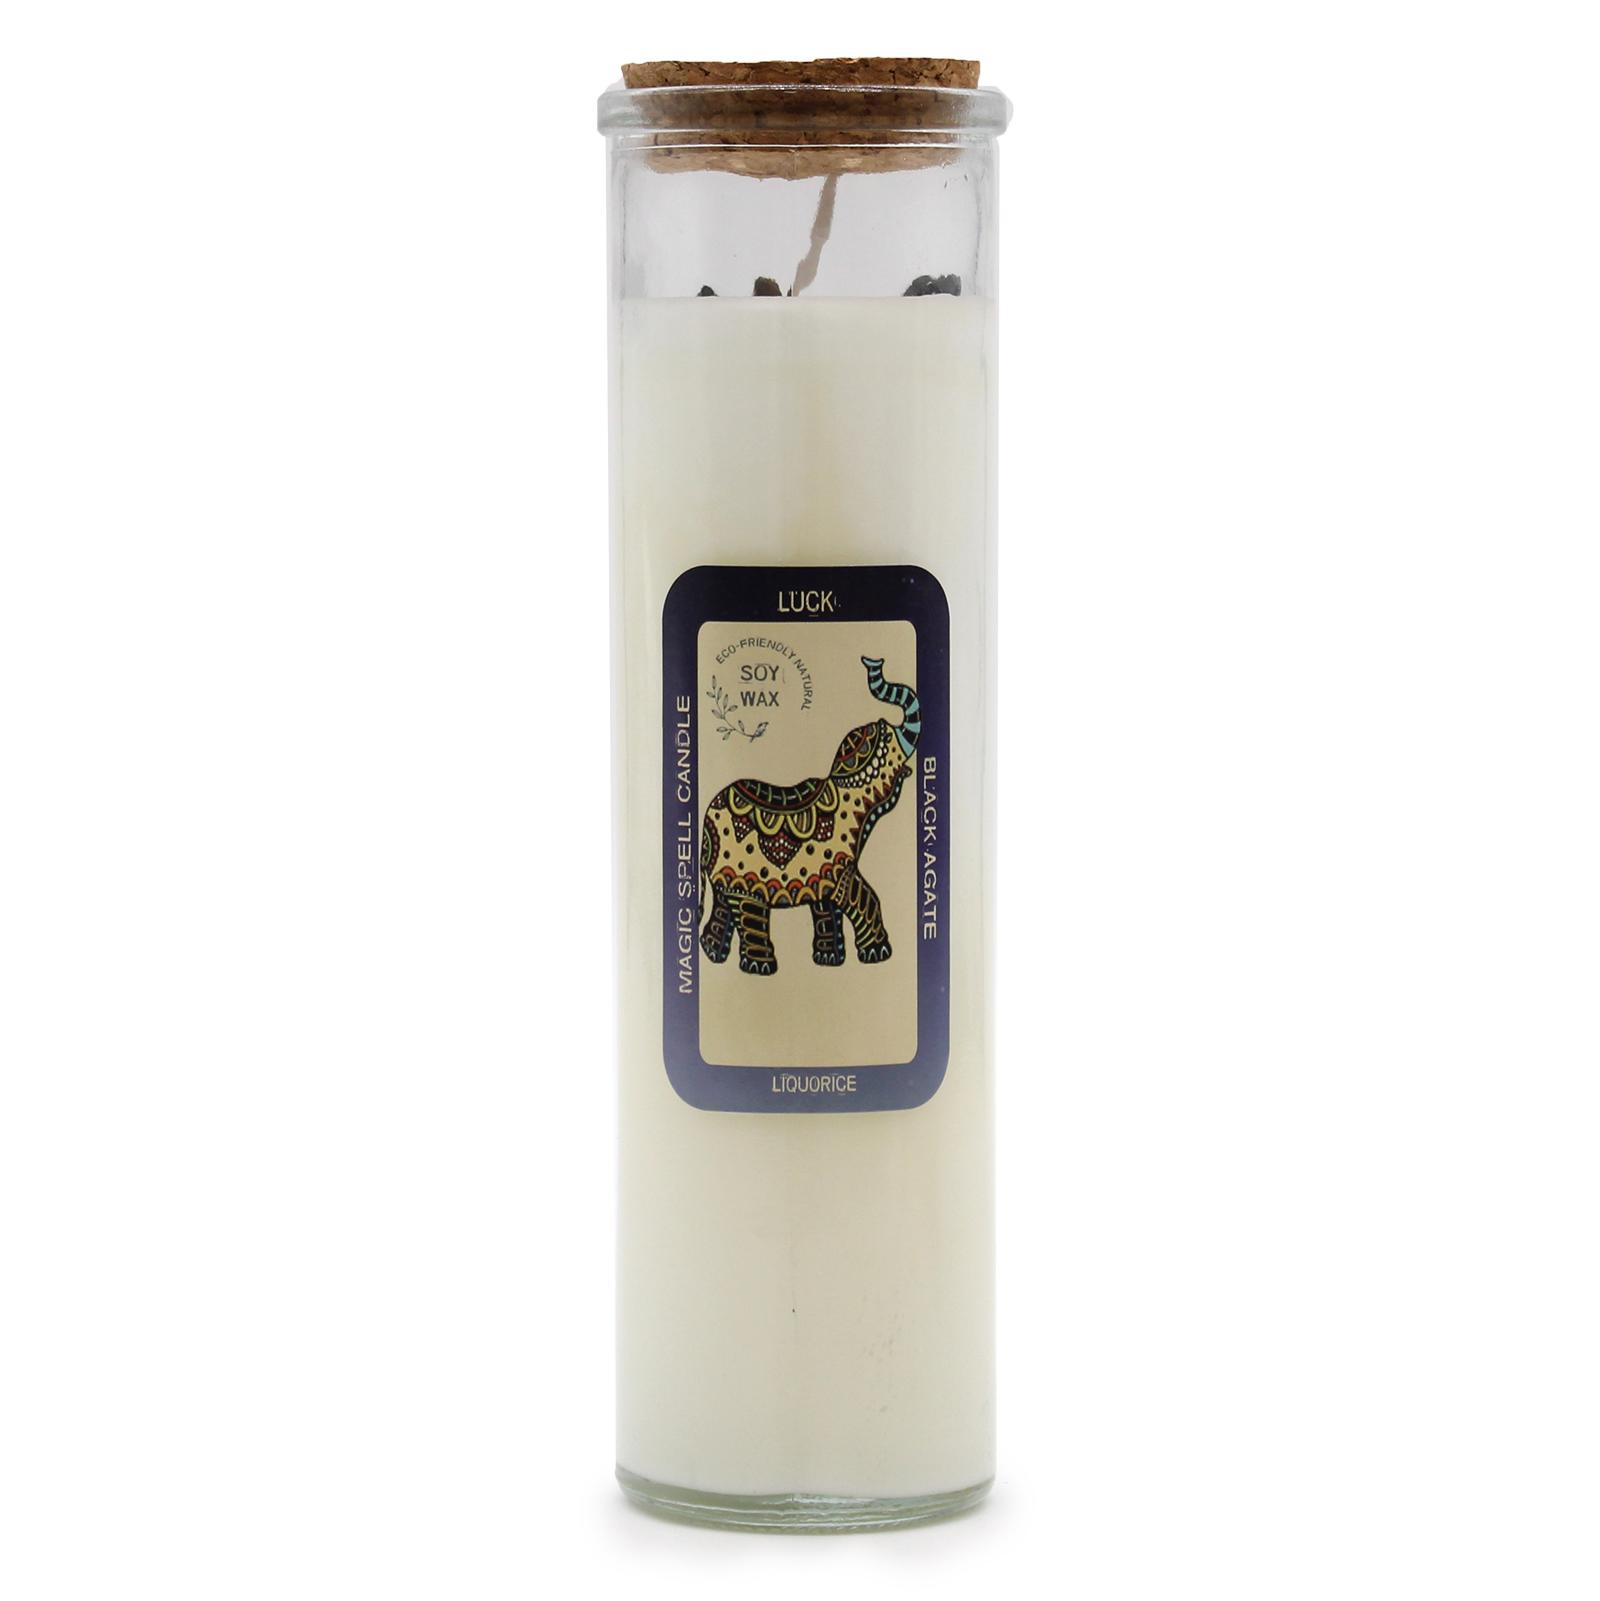 Magic Spell Candle (Luck)